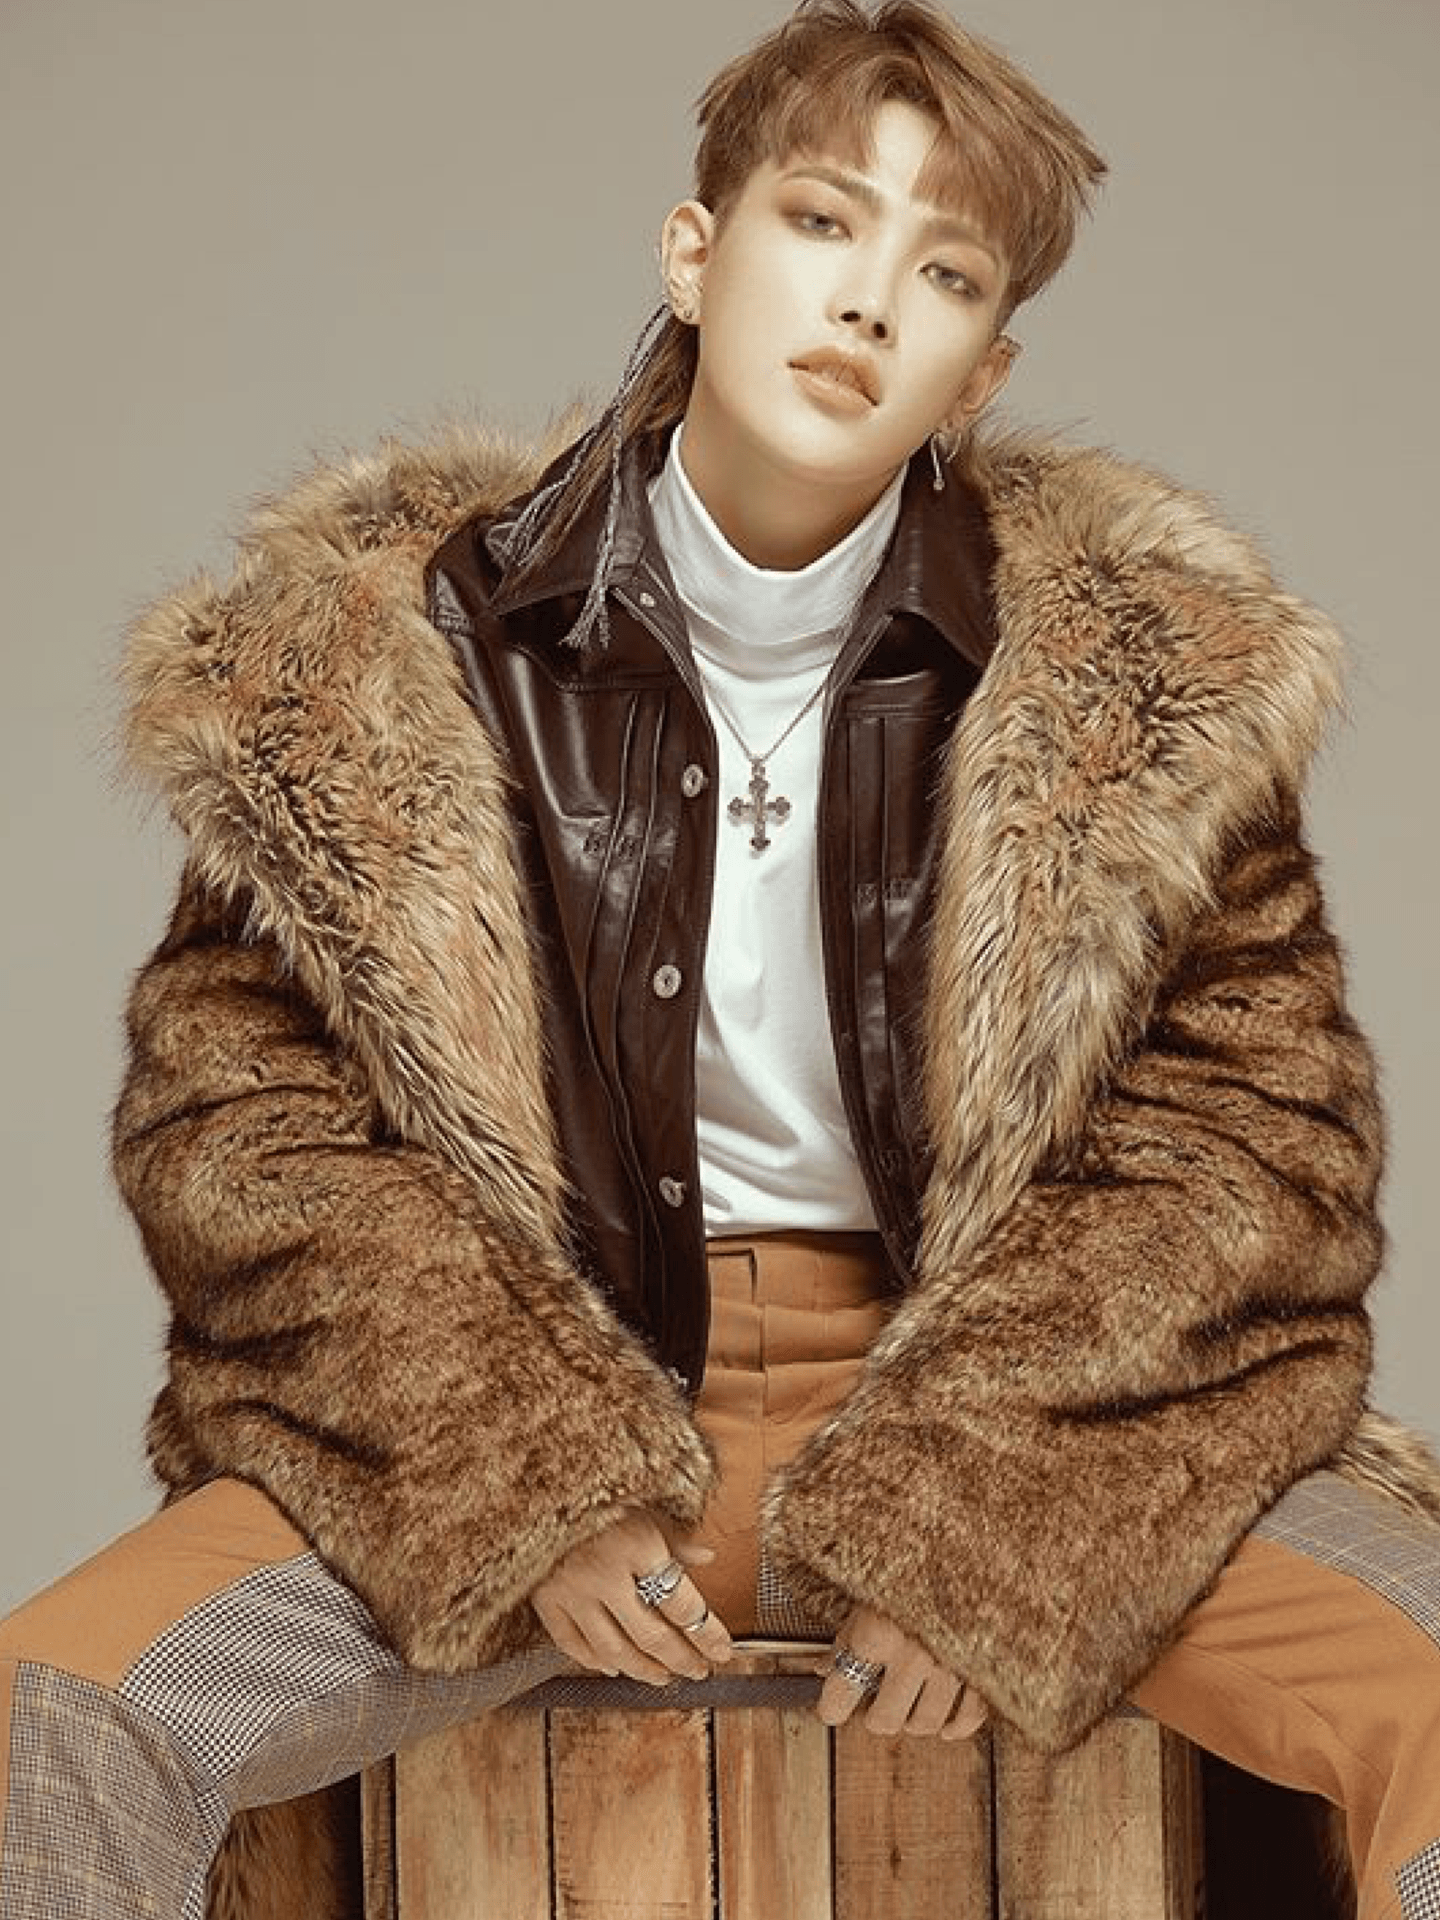 Hongjoong Ateez Wallpapers Wallpaper Cave | Free Hot Nude Porn Pic Gallery